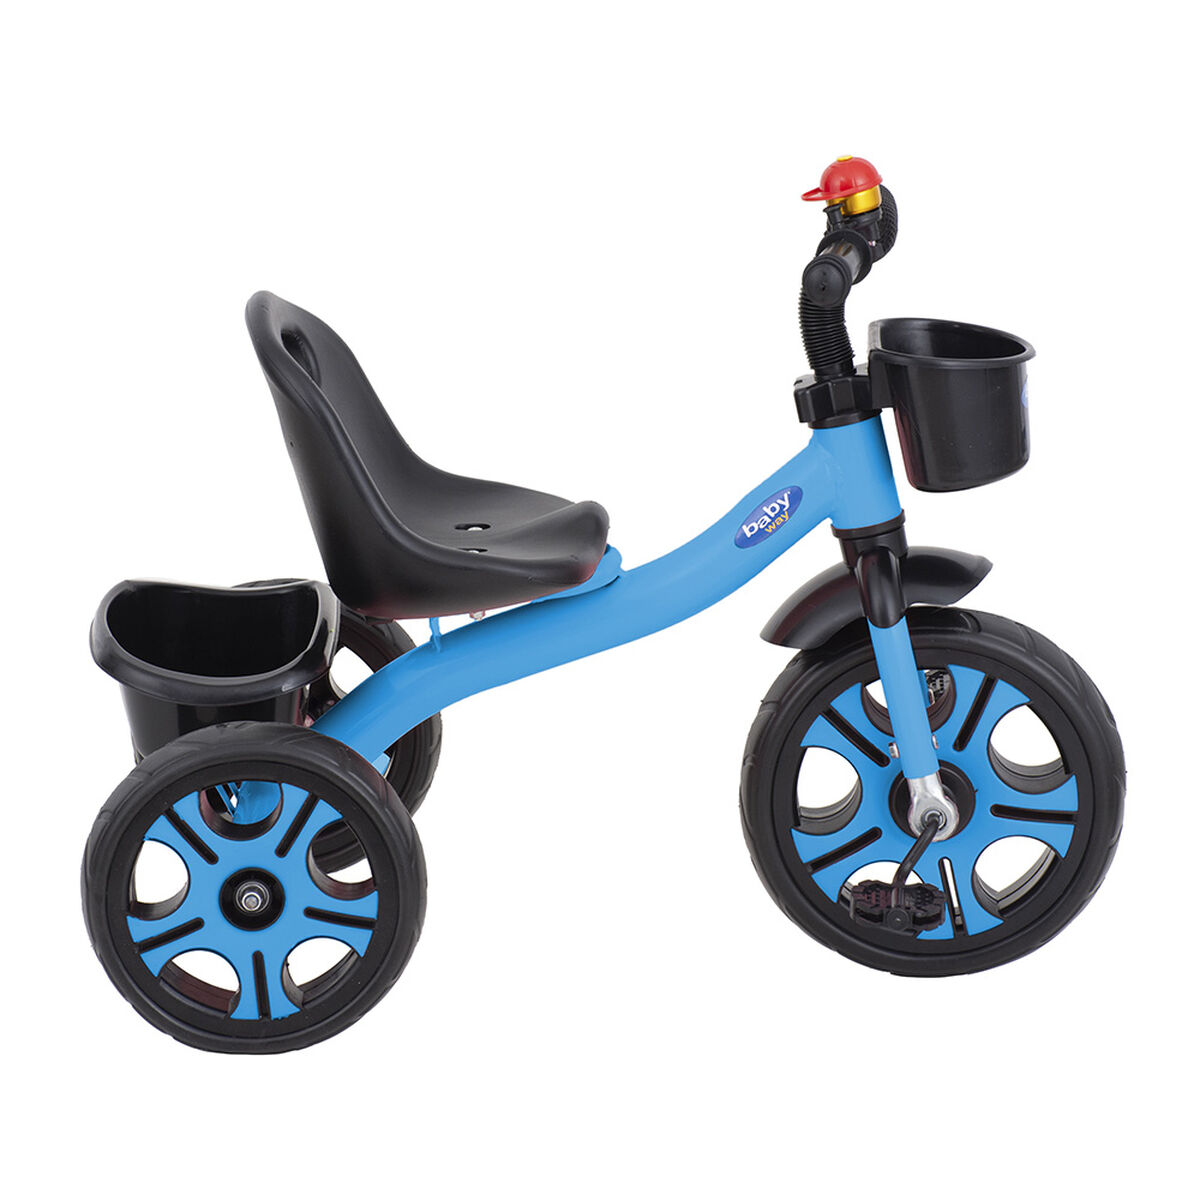 Azul Bw-504B20 Triciclo Musica Y Luces Baby Way 